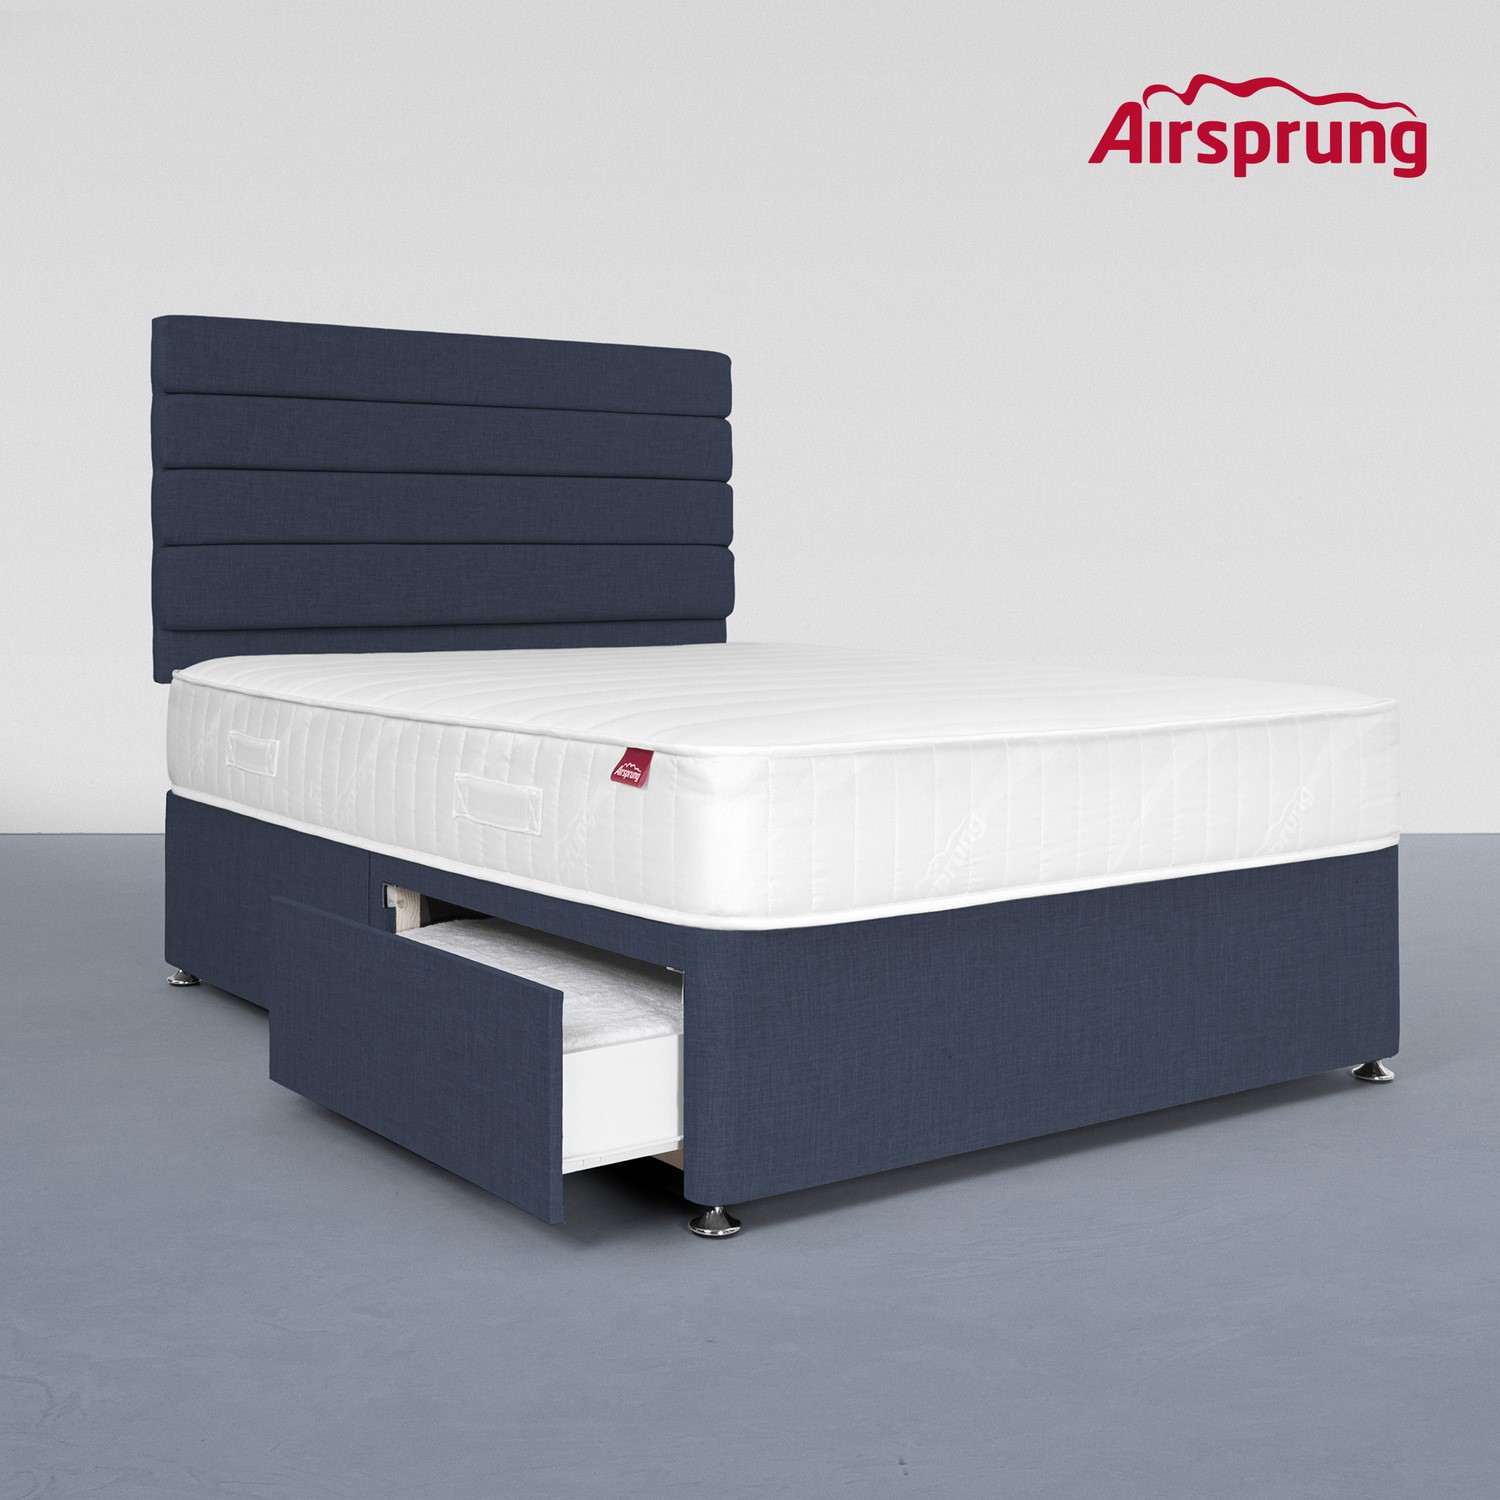 Read more about Airsprung double 2 drawer divan bed with hybrid mattress midnight blue